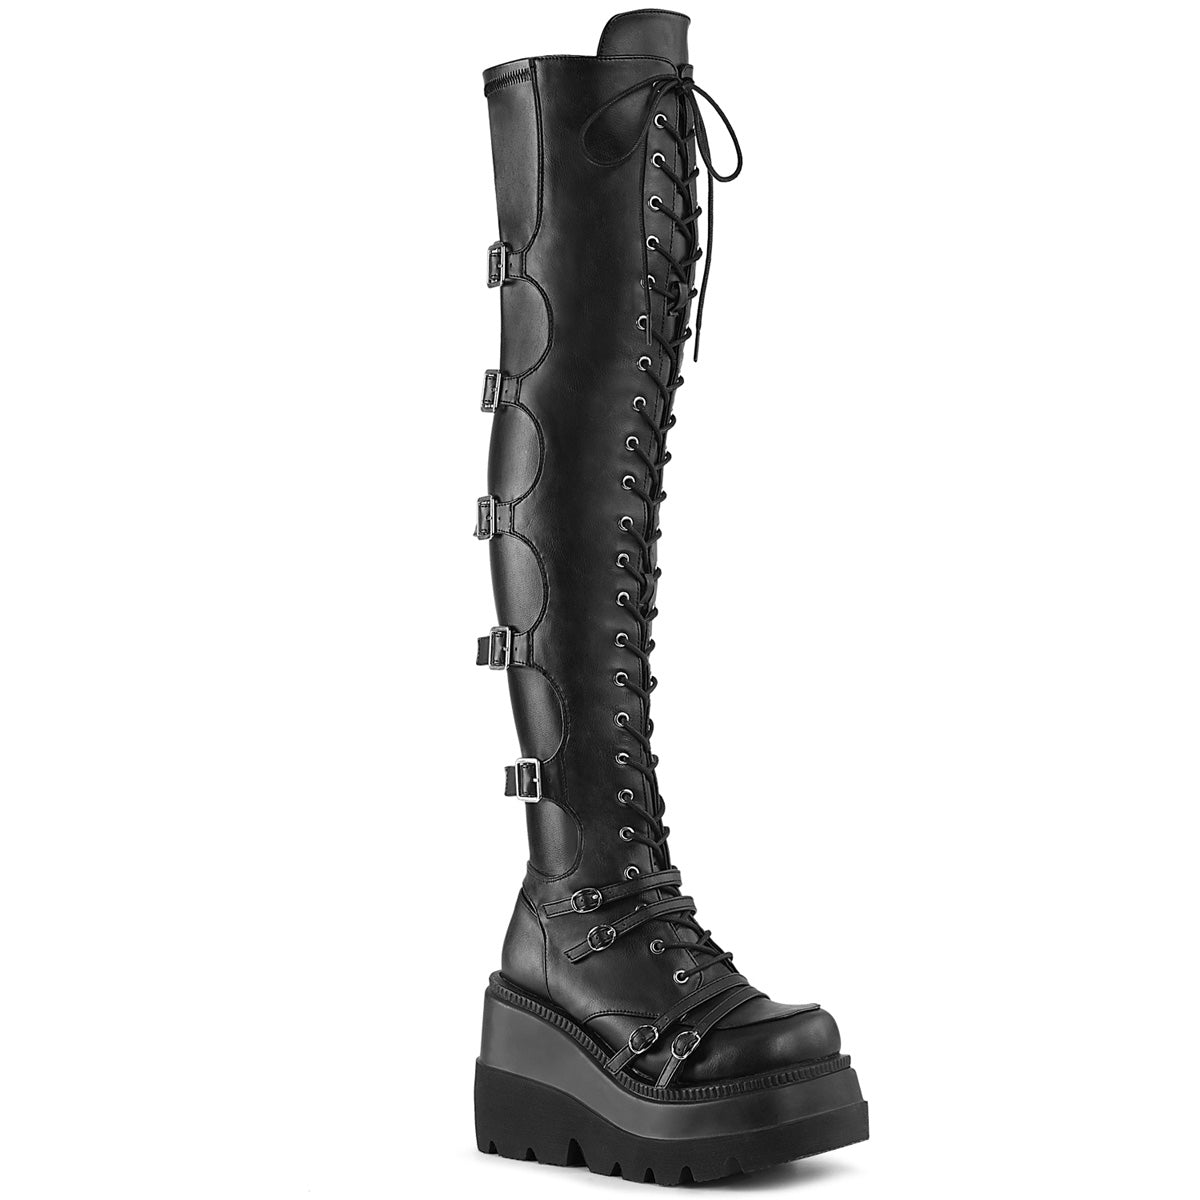 Too Fast | Demonia Shaker 350 | Black Stetch Vegan Leather Women's Over The Knee Boots